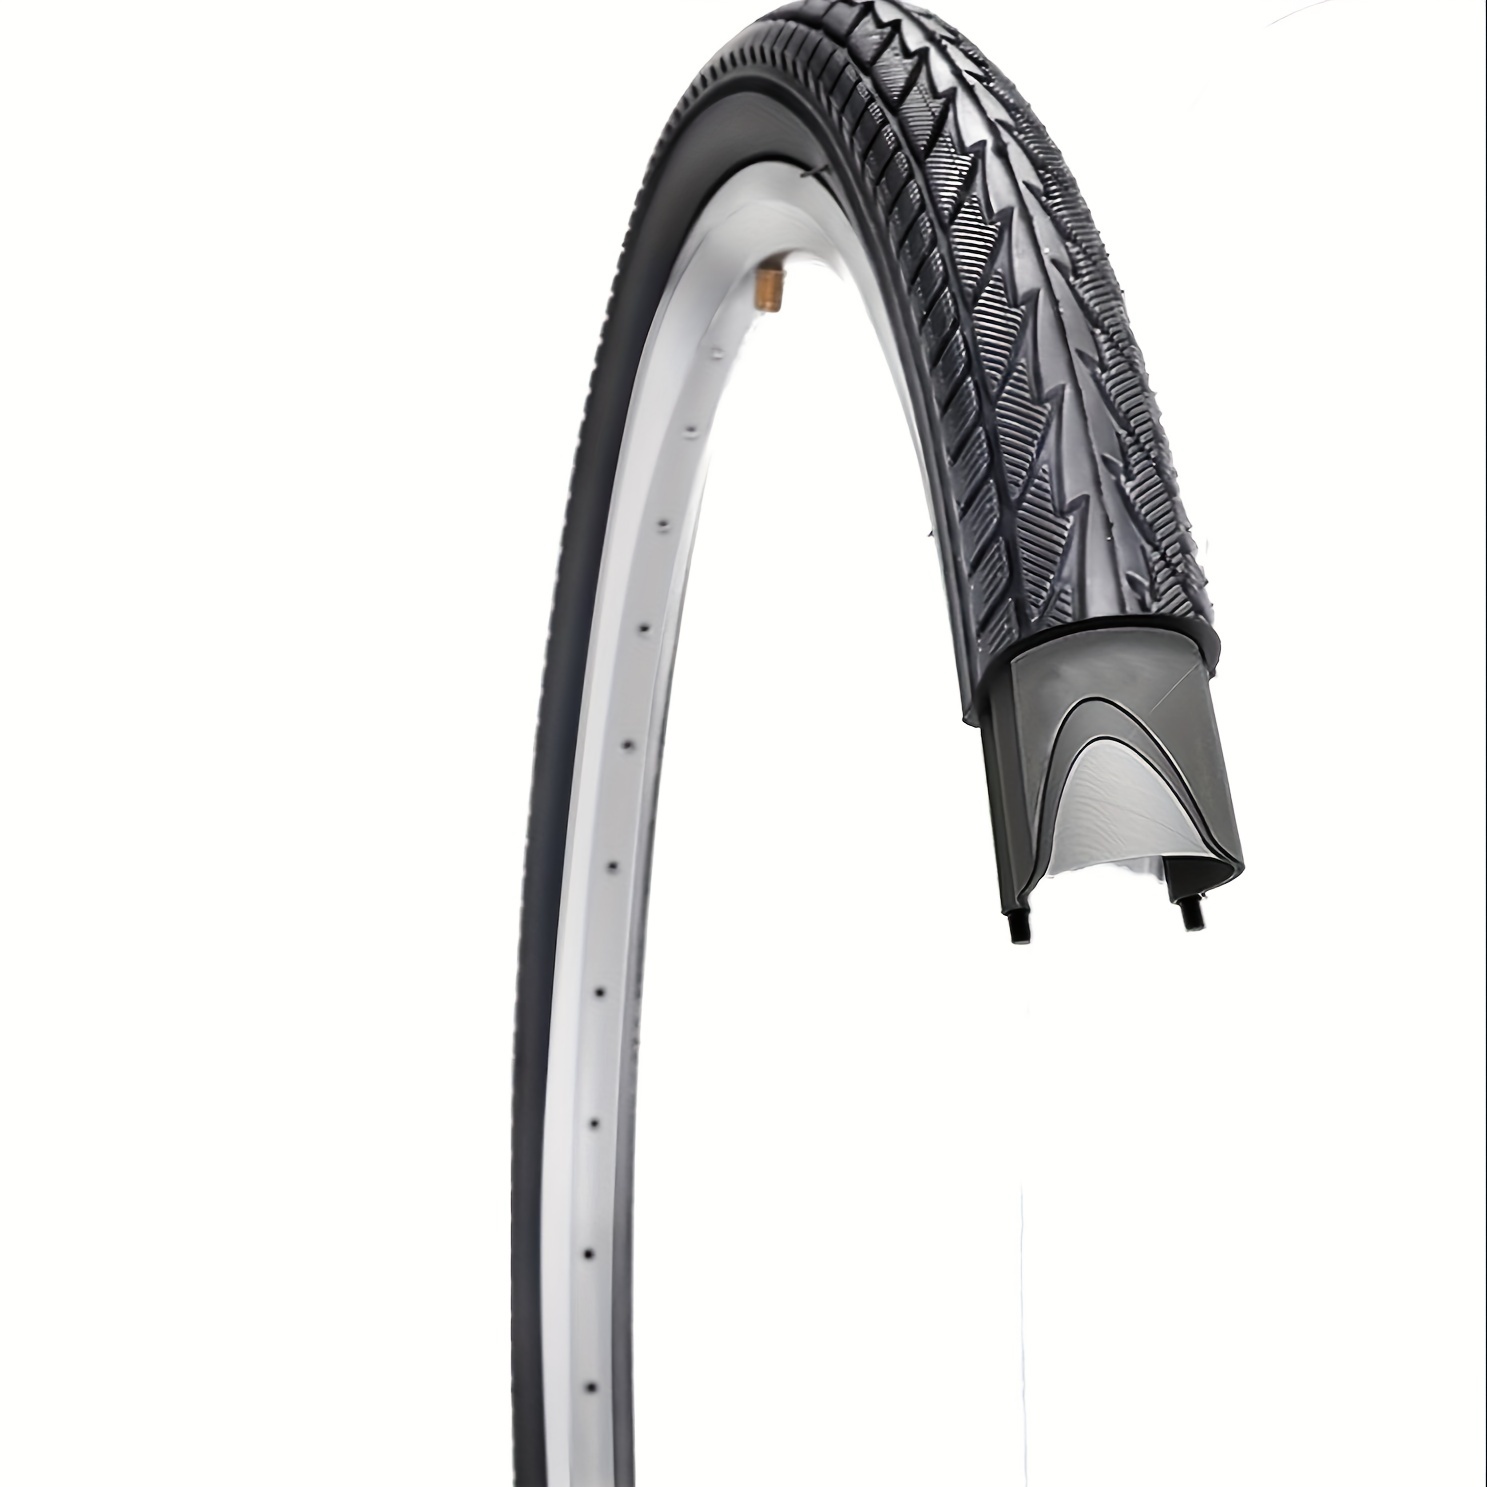 

1 Pack 26"x1.75" Replacement Bike Tire For City Commuter Bicycles, Urban Mountain Tire